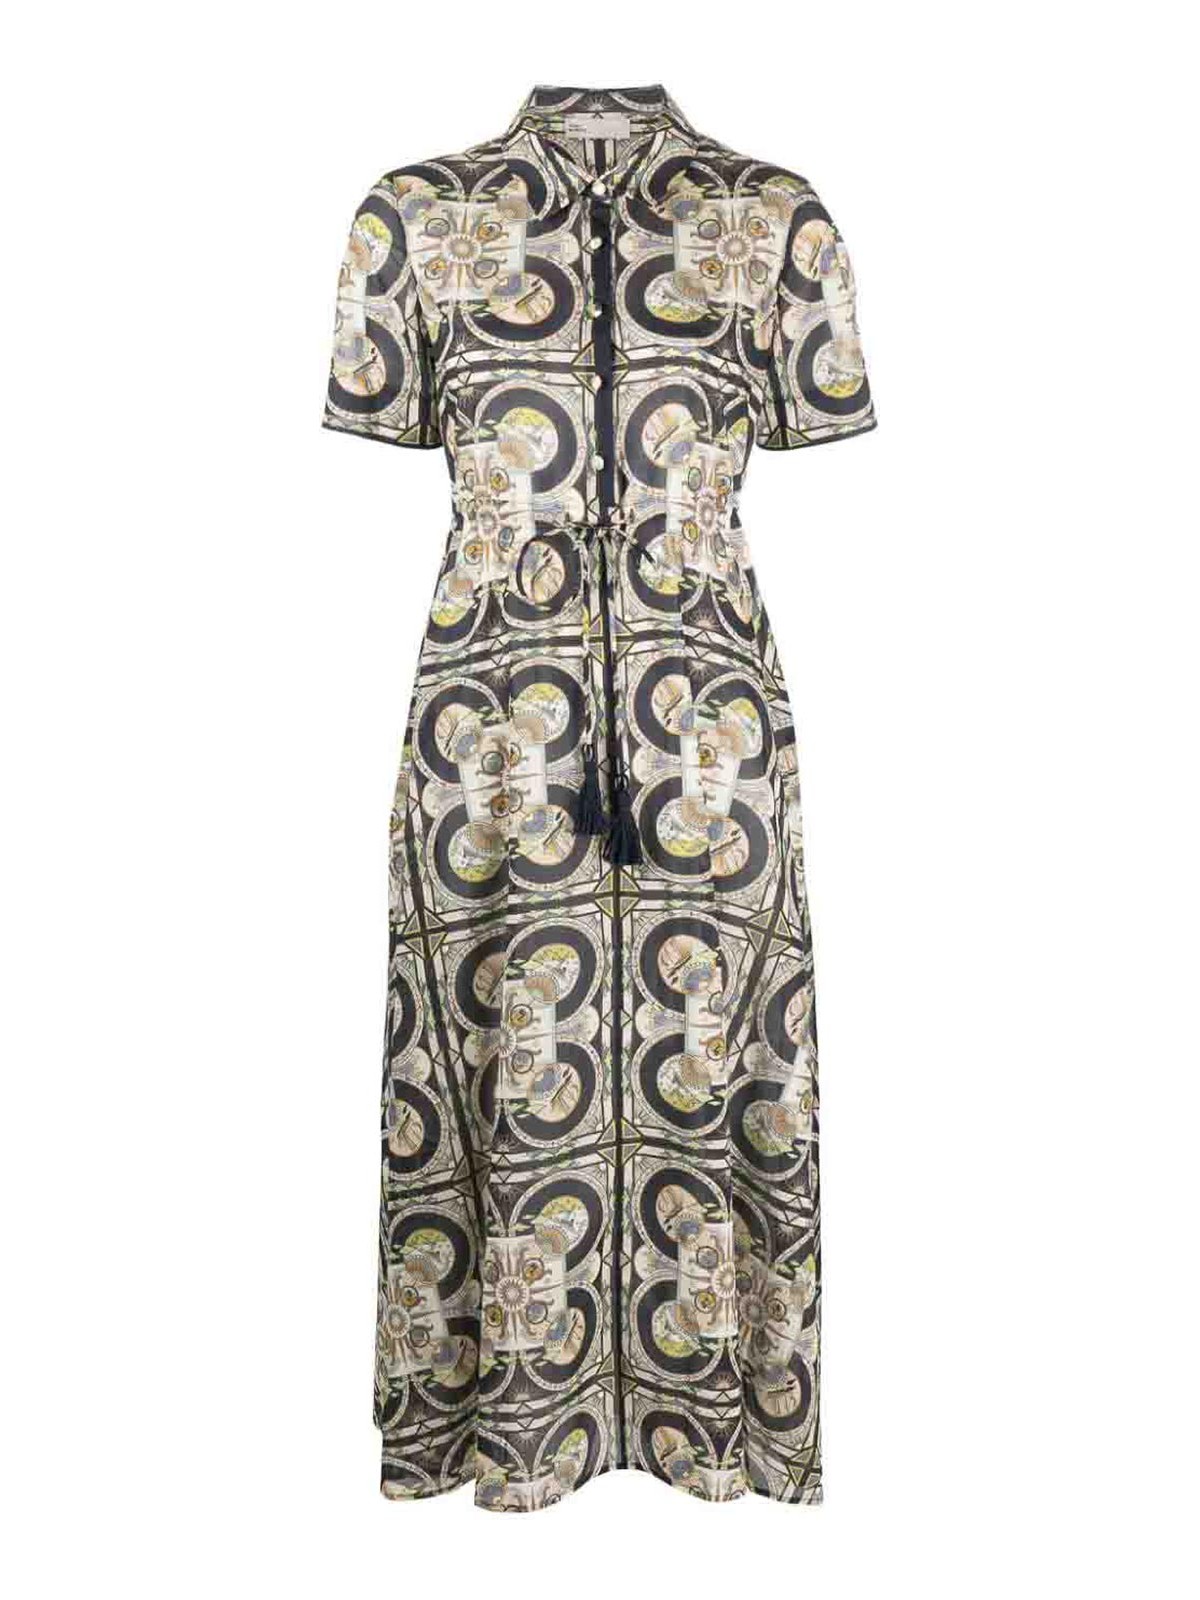 Tory Burch Printed Cotton Shirtdress In Beige